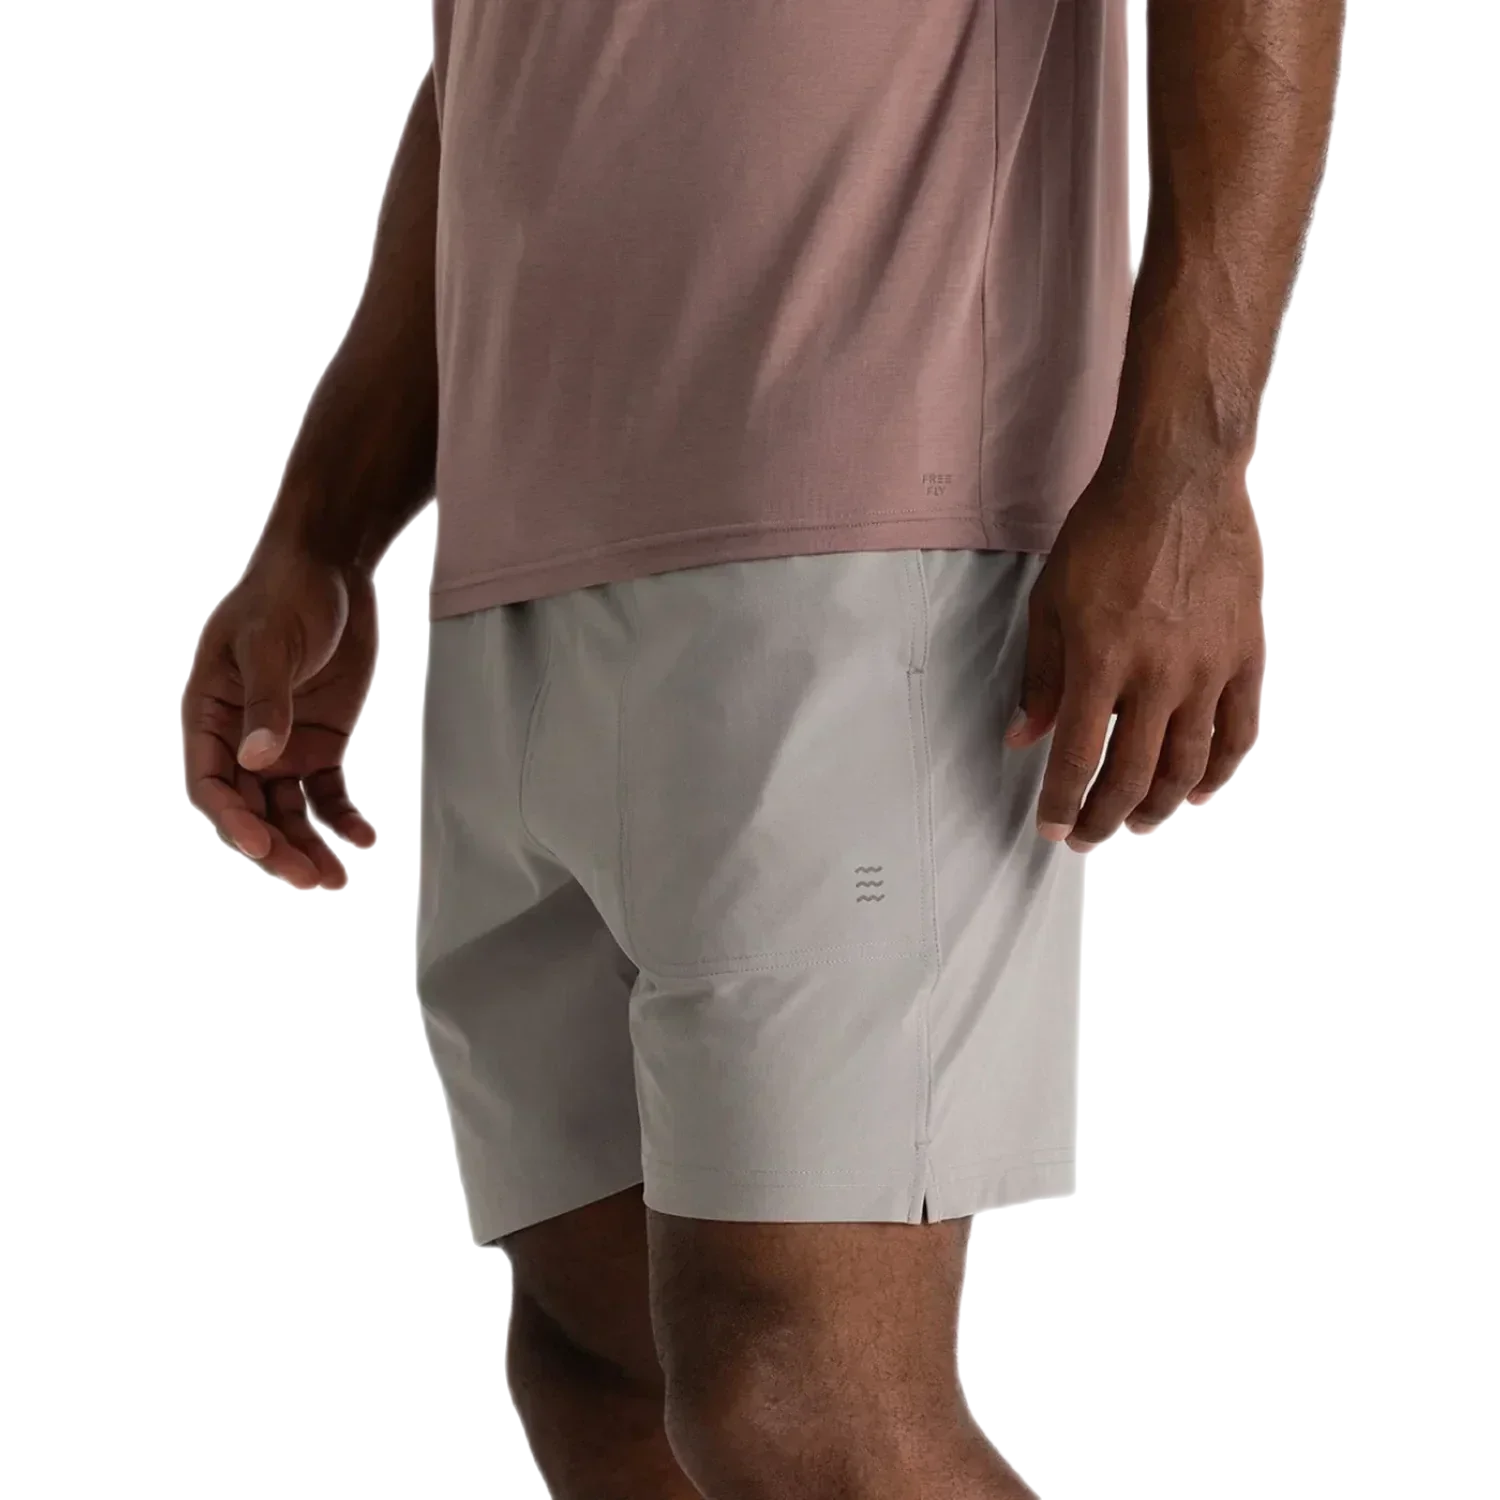 Free Fly Apparel 01. MENS APPAREL - MENS SHORTS - MENS SHORTS ACTIVE Men's Bamboo-Lined Active Breeze Short - 7 in CEMENT